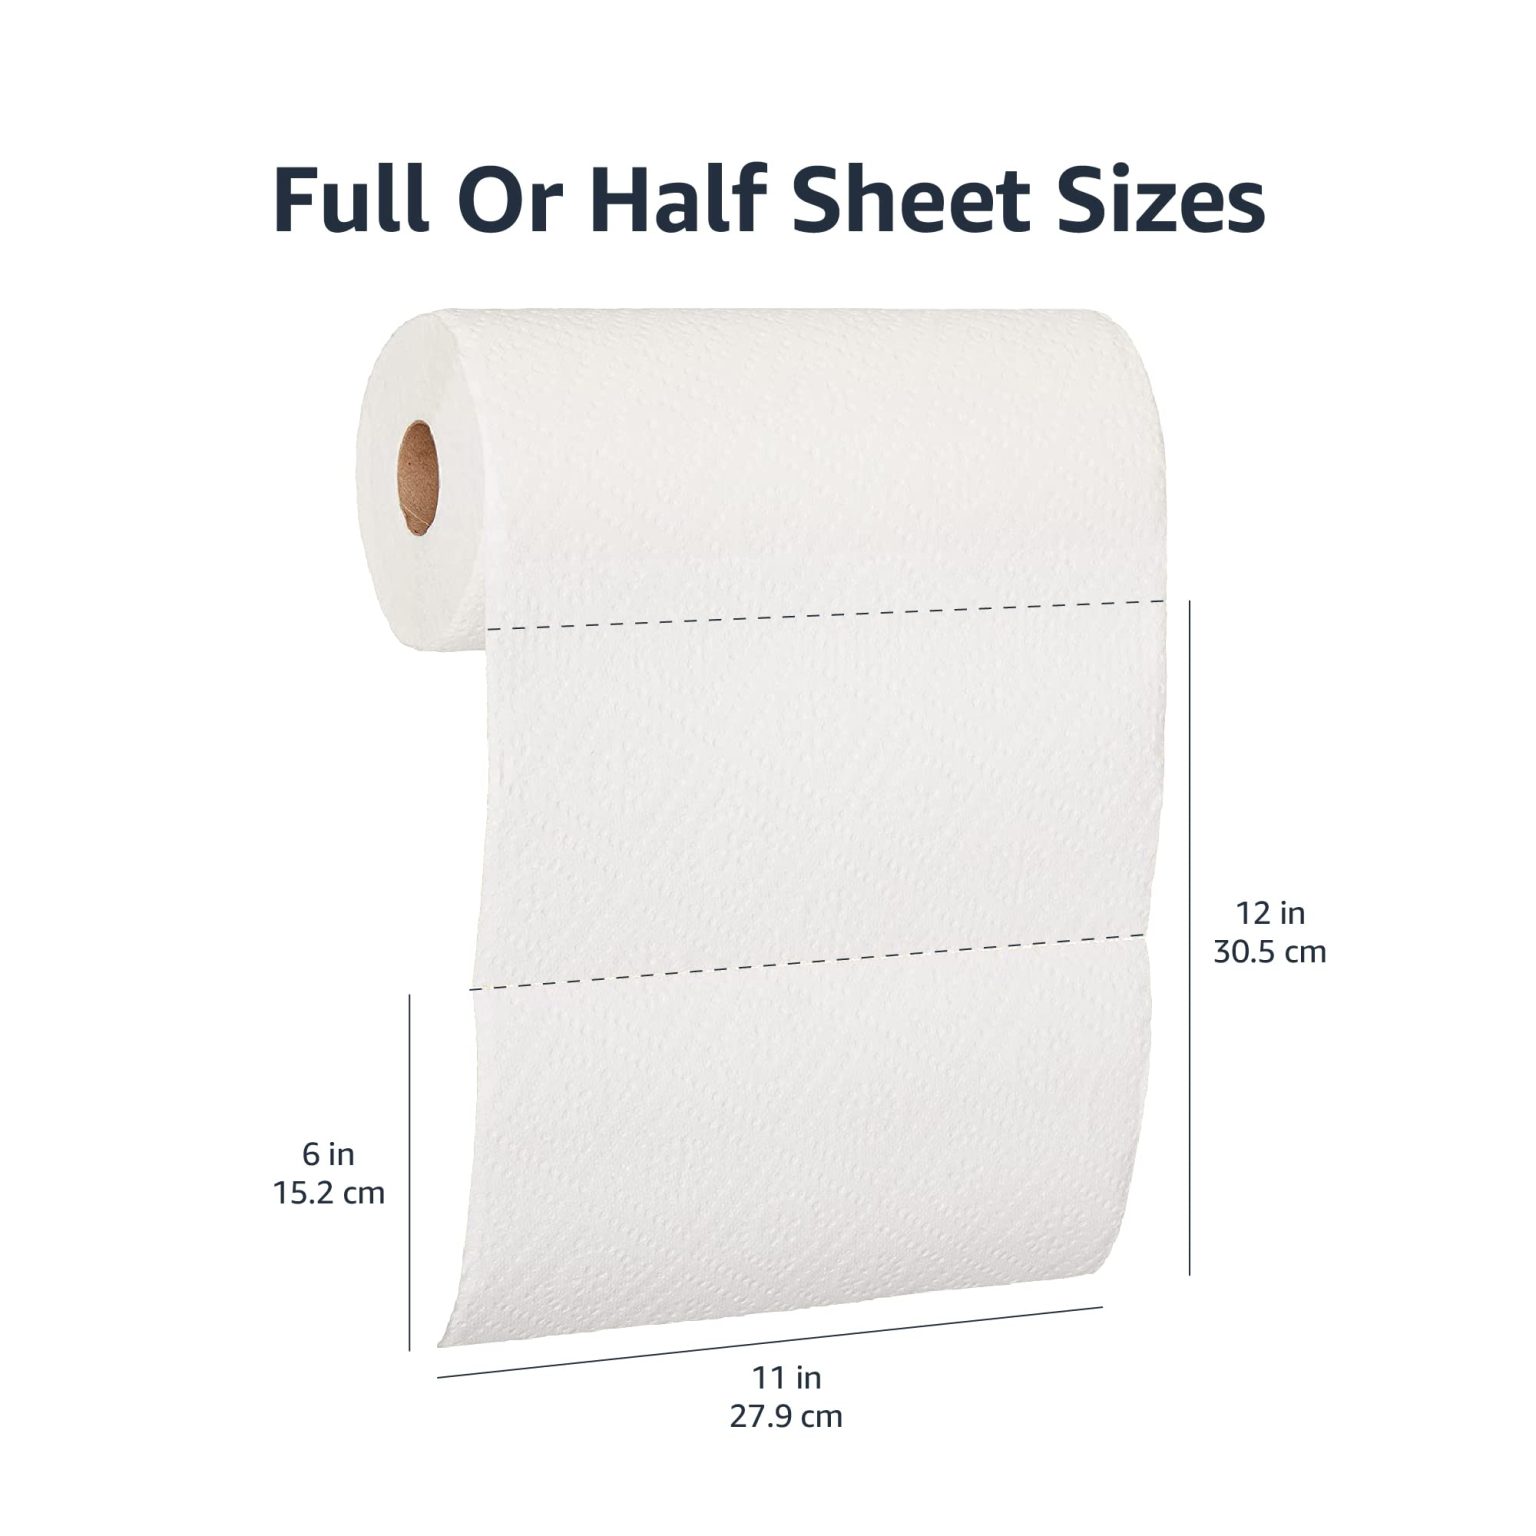 Half Sheet Size In Inches